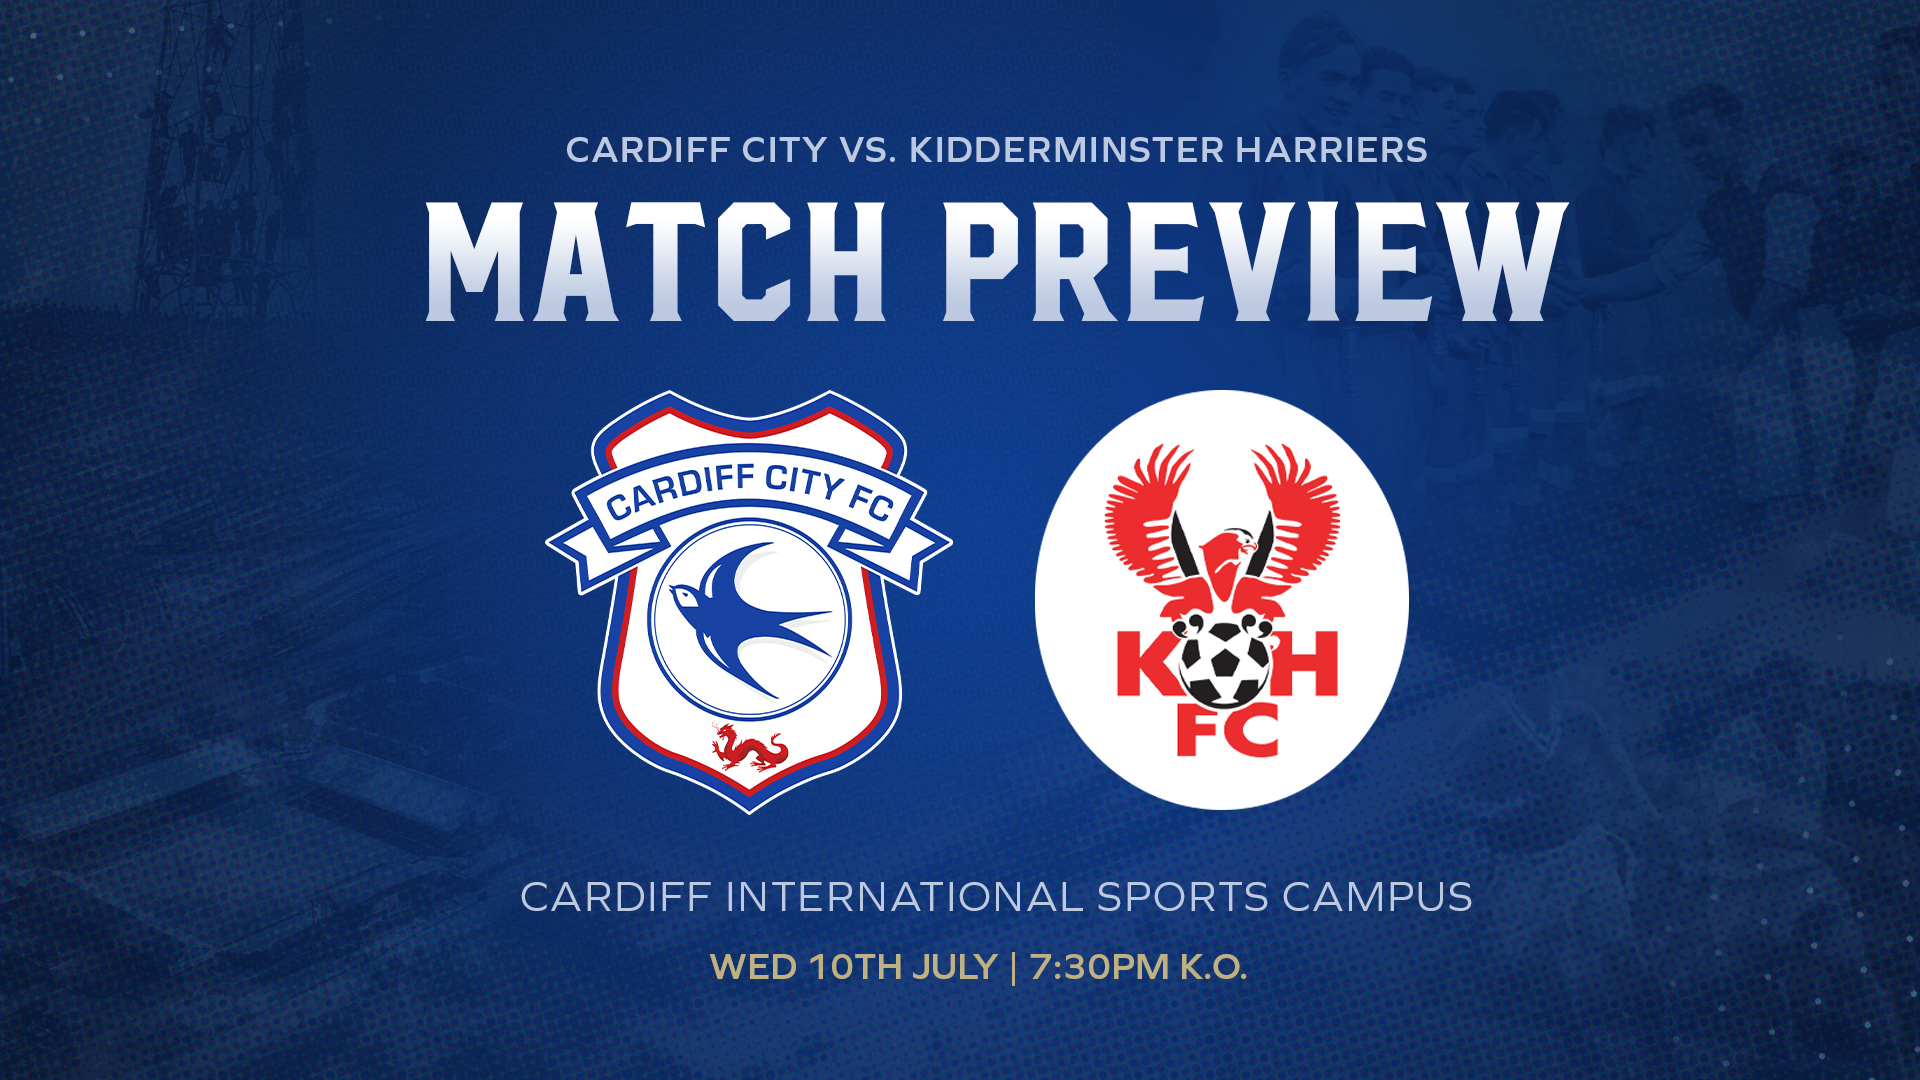 Match Preview: Cardiff City vs. Kidderminster Harriers